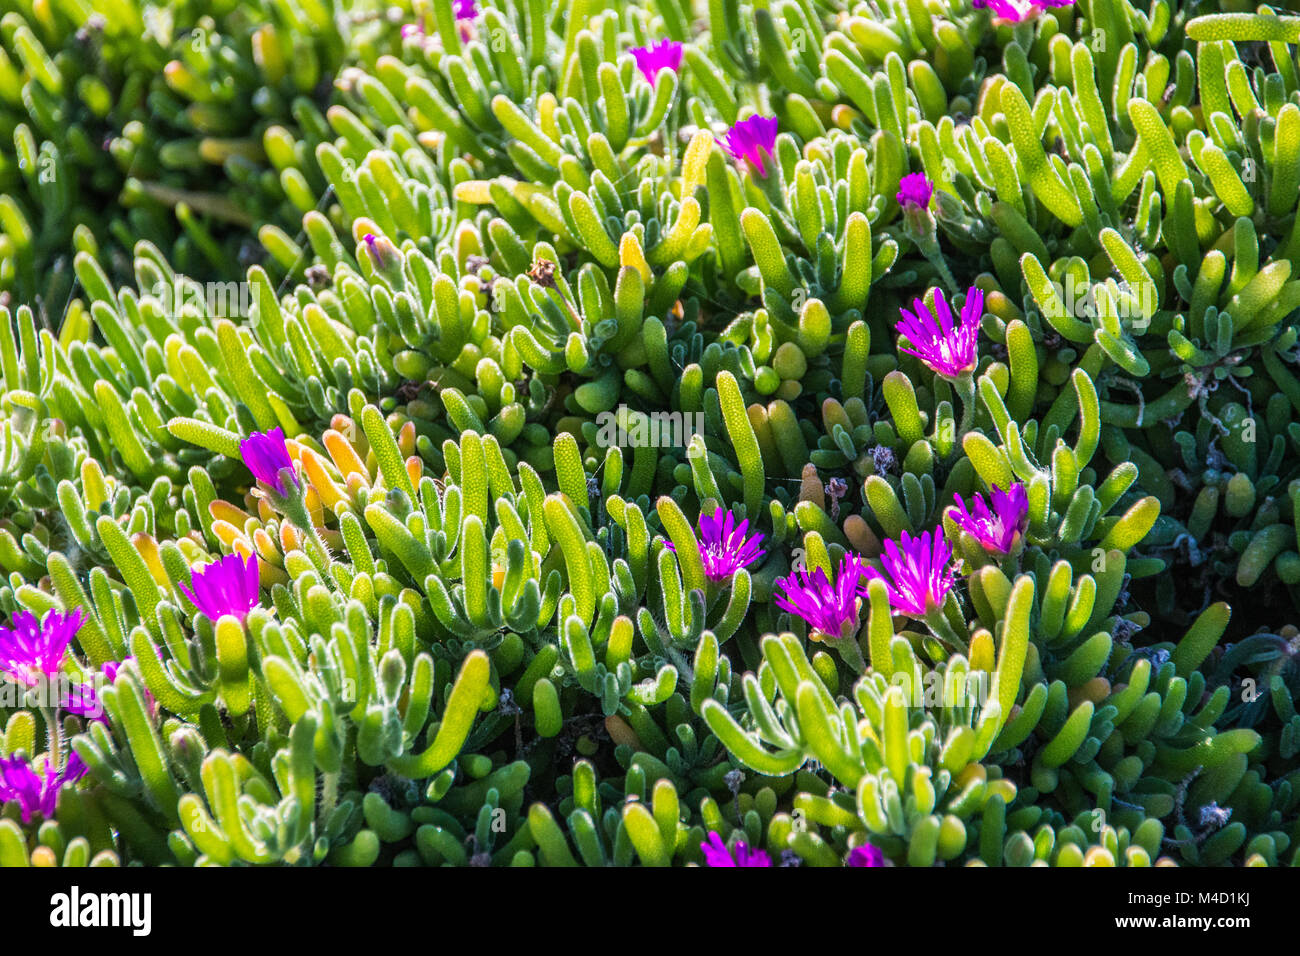 Green Ice plants with purple Flowers in California, USA Stock Photo